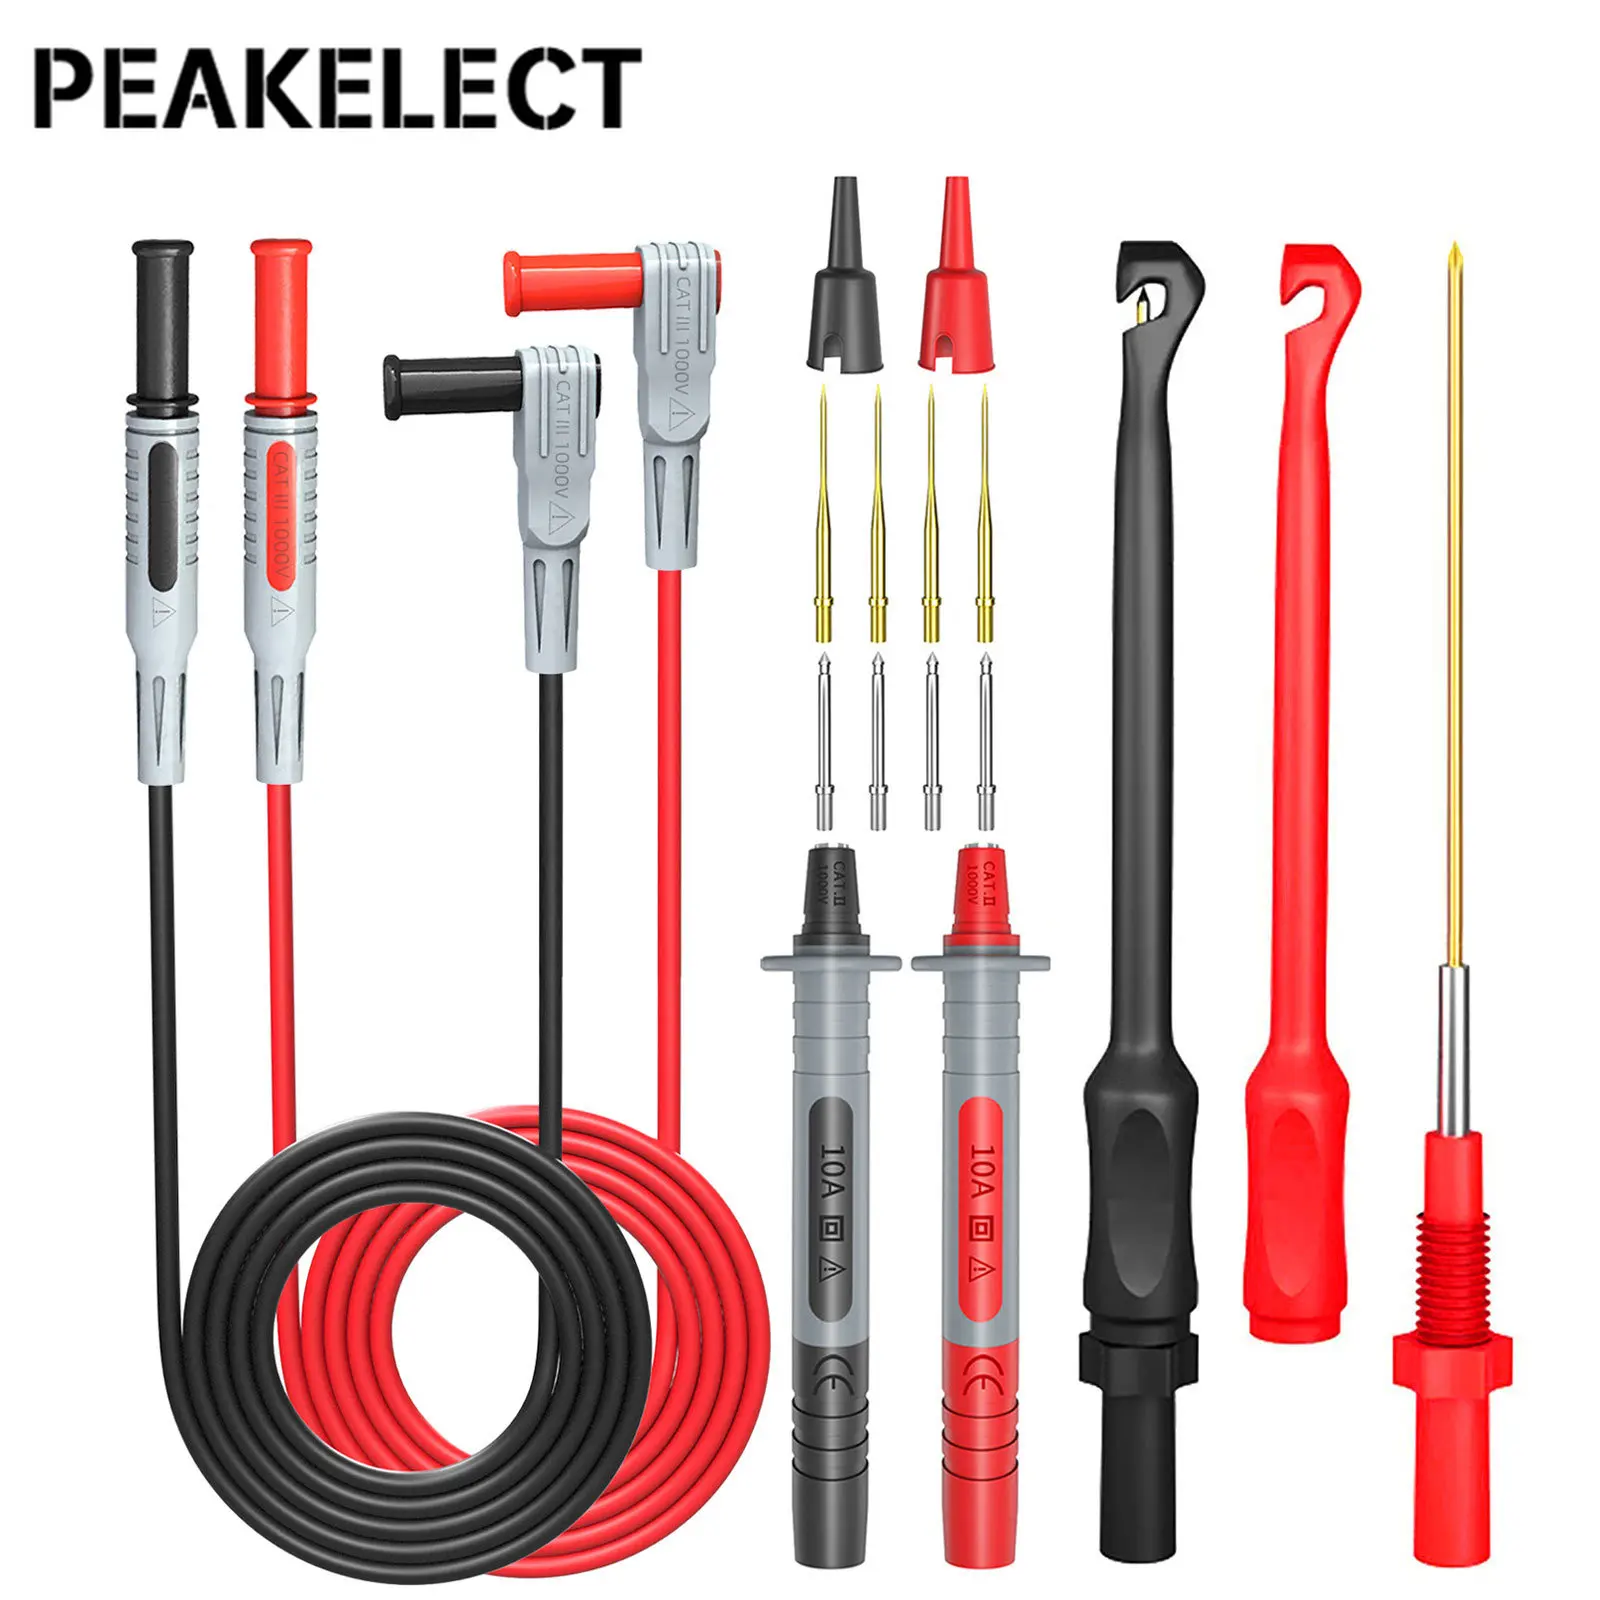 Peakelect P1033B Multimeter Test Probes Leads Kit with Wire Piercing Puncture 4mm Banana Plug Test Leads Test Probes 10a professional piercing needle test clips multimeter testing probe hook with 4mm socket